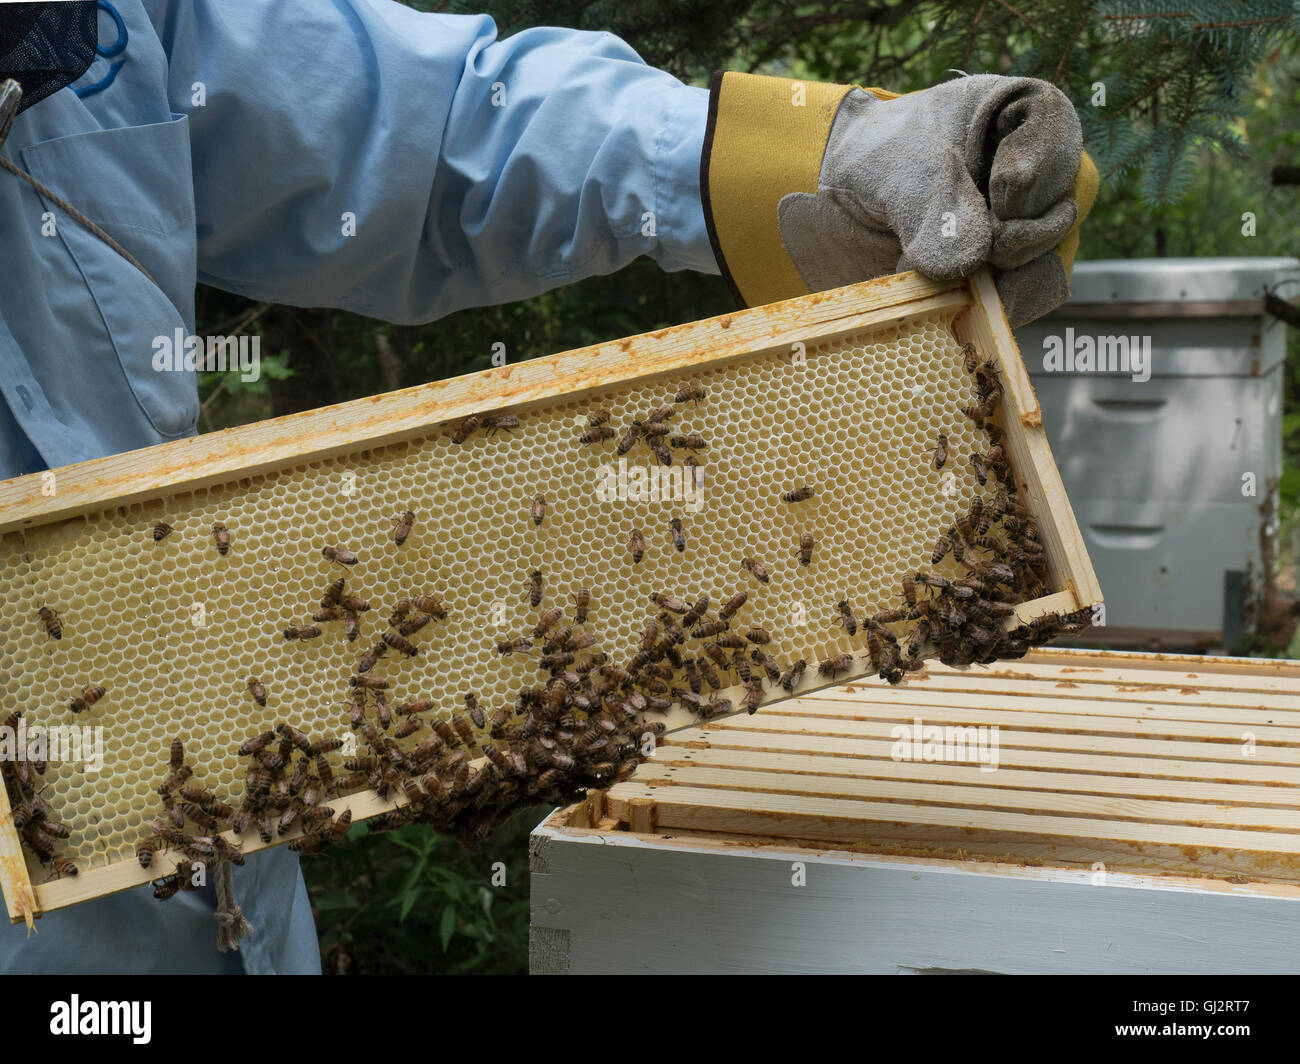 Beekeeper checking on bees Stock Photo